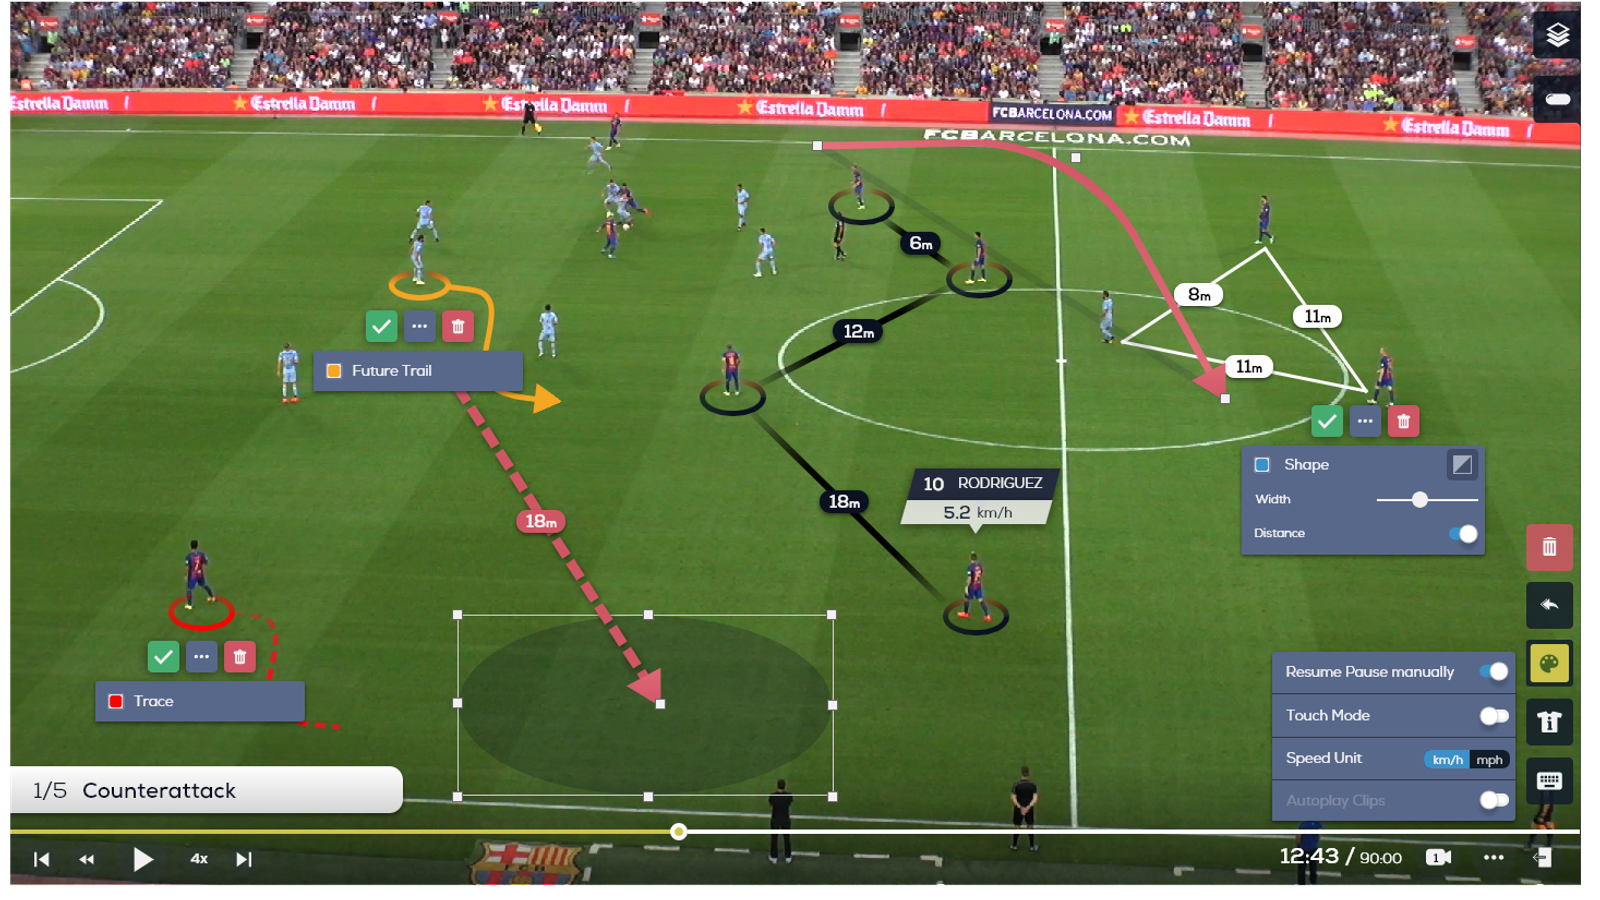 Video analysis at TSV 1860 Munich: Developing the future professional  players in German football - Spiideo [Spanish]